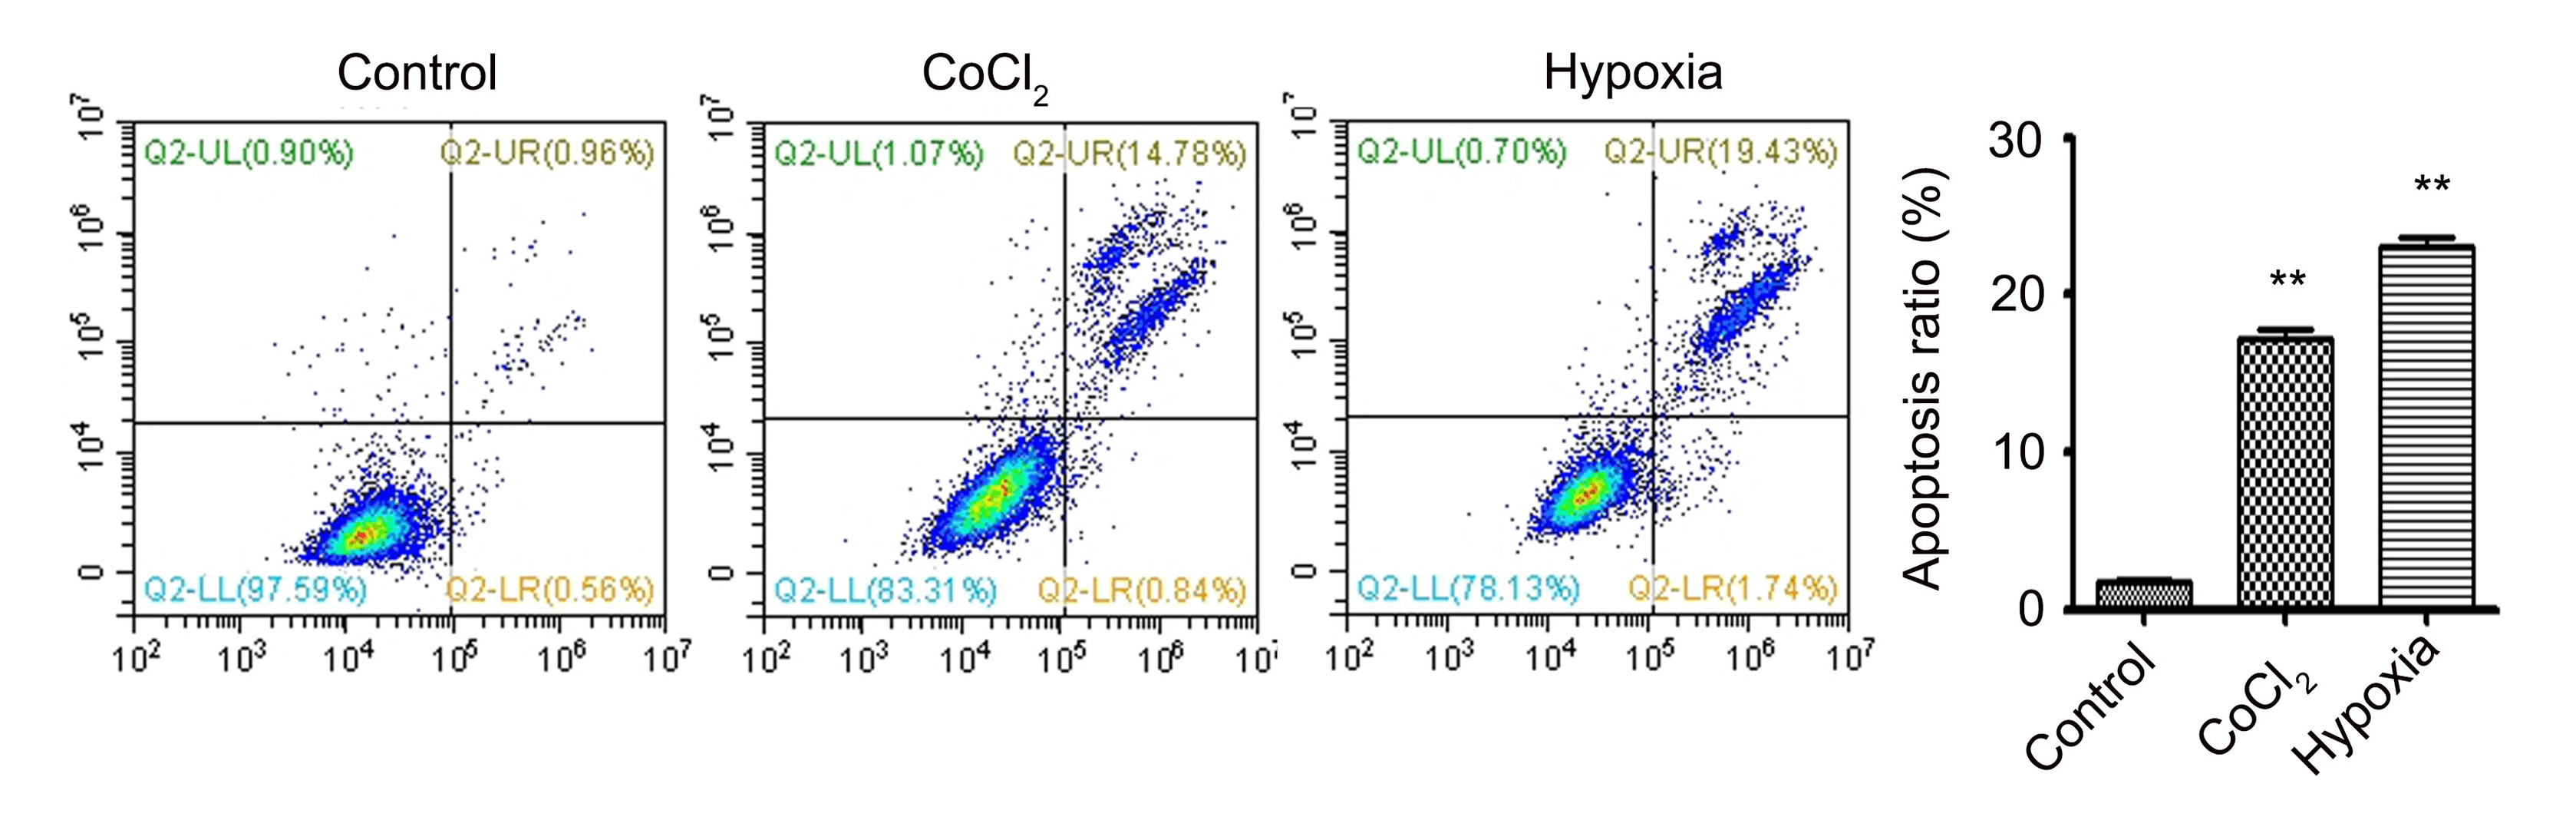 Hypoxia inhibits cell proliferation and induces cell apoptosis. H9C2 cells were treated with CoCl2 (900 μM) or a hypoxic microenvironment (1% O2) for 24 h. Cell apoptosis was detected by flow cytometry. *P < 0.05, **P < 0.01. Cell Meter™ Phosphatidylserine Apoptosis Assay Kit (AAT Bioquest) was used to visualize apoptotic cells according to the manufacturer’s instructions. <b>Source:</b> Integrin β3 inhibits hypoxia-induced apoptosis in cardiomyocytes by Yifan Su, Hua Tian, Lijiang Wei, Guohui Fu, Ting Sun. <em>Acta Biochimica et Biophysica Sinica</em>, Volume 50, Issue 7, July 2018. 